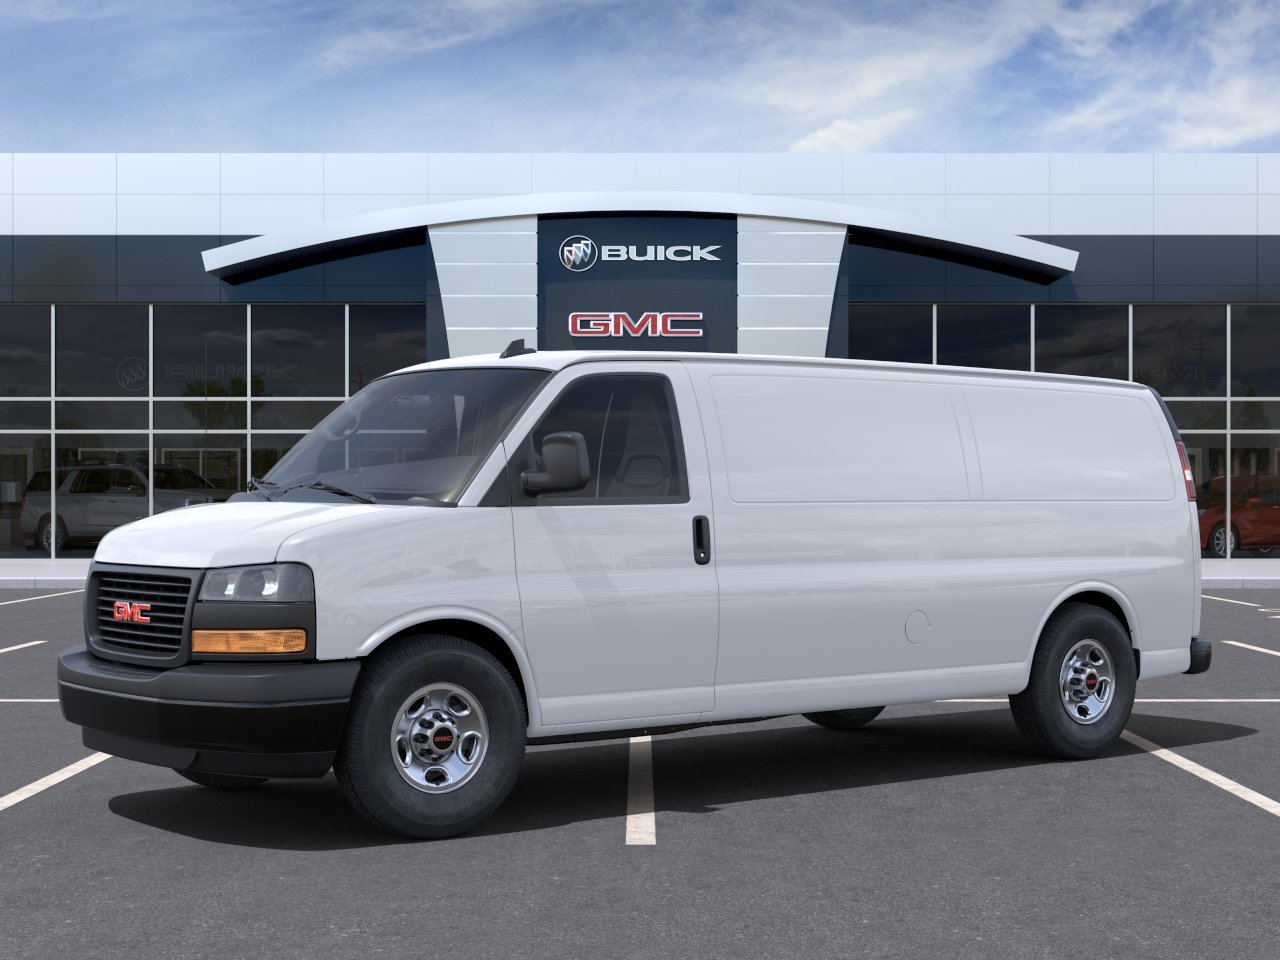 New 2023 GMC Savana 2500 for Sale Right Now - Autotrader